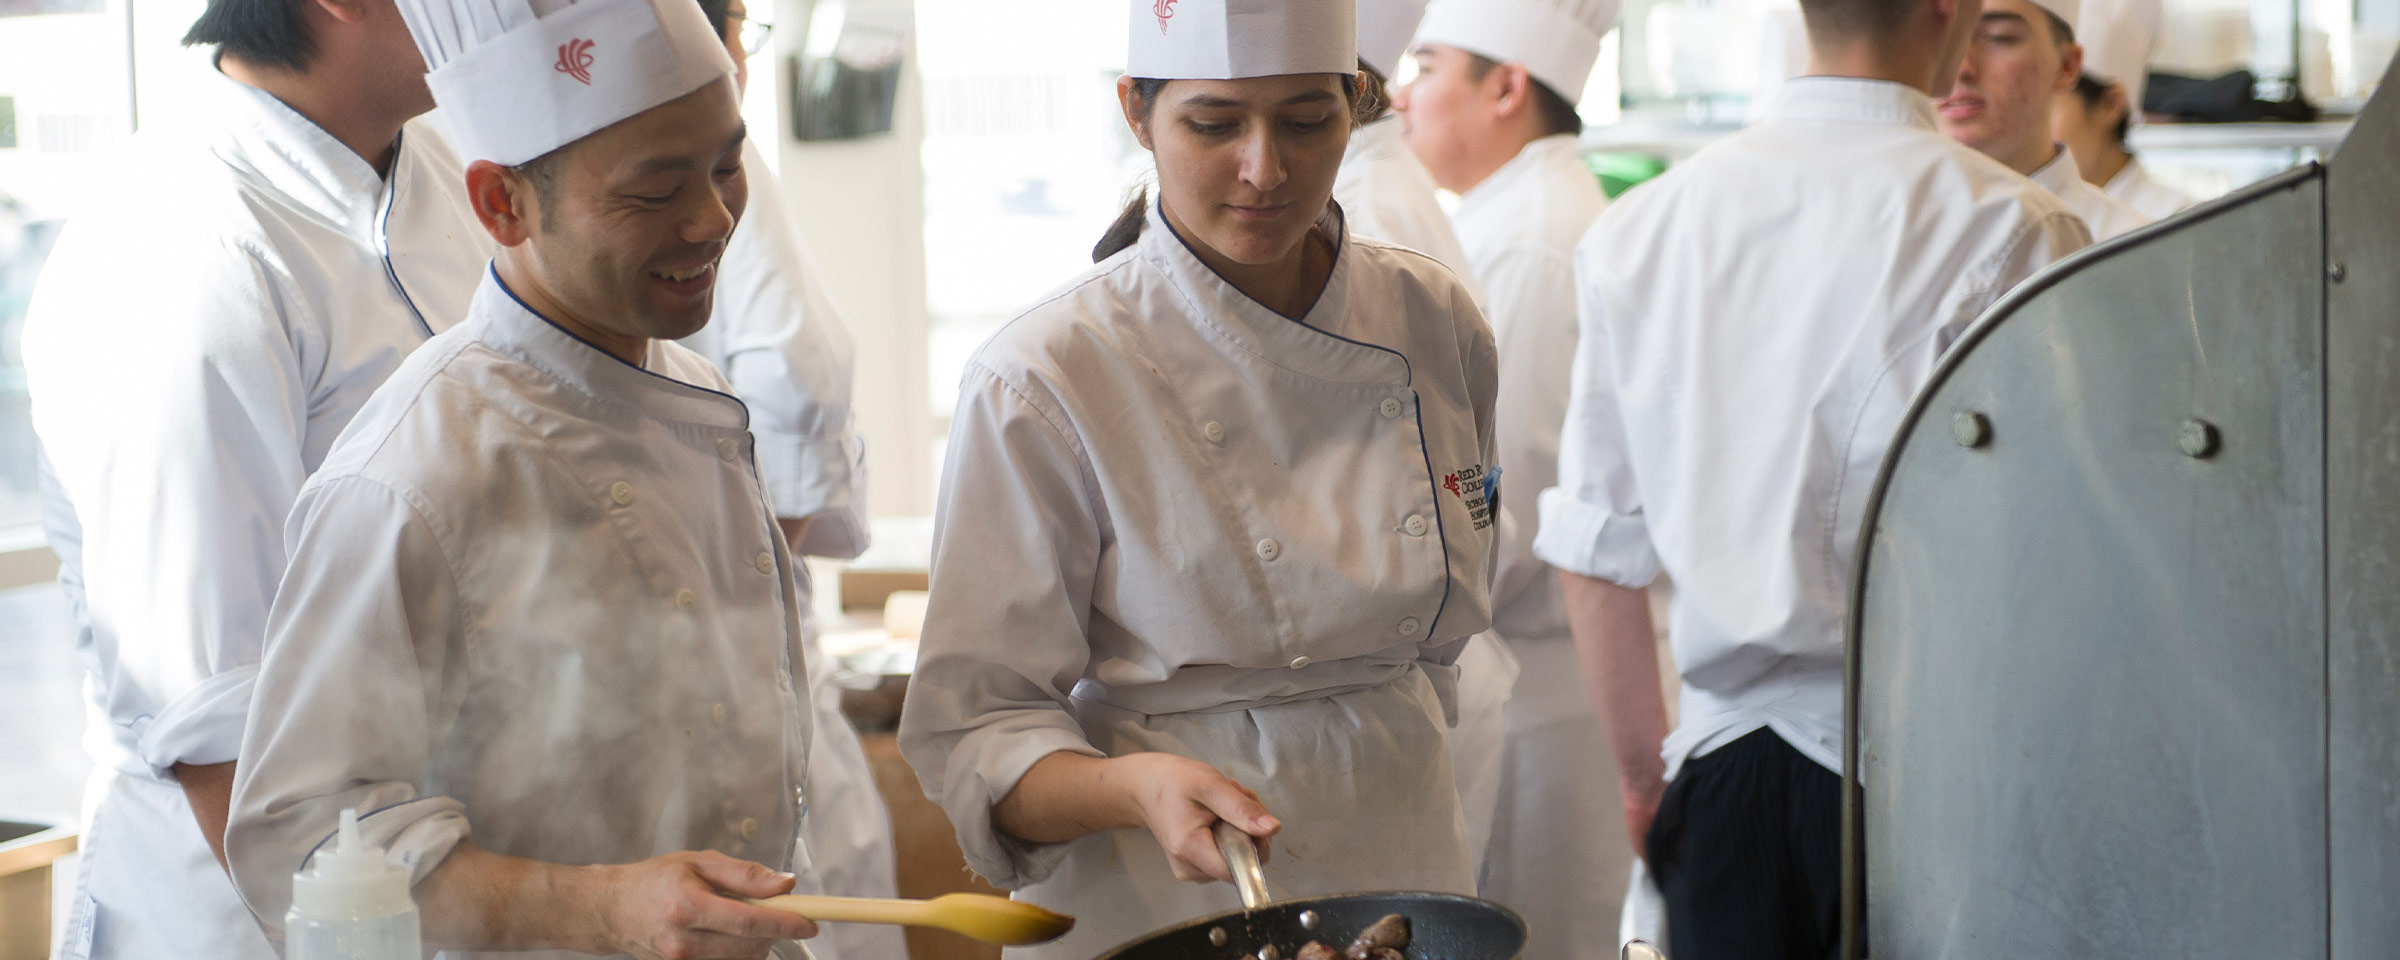 Students in a commercial kitchen